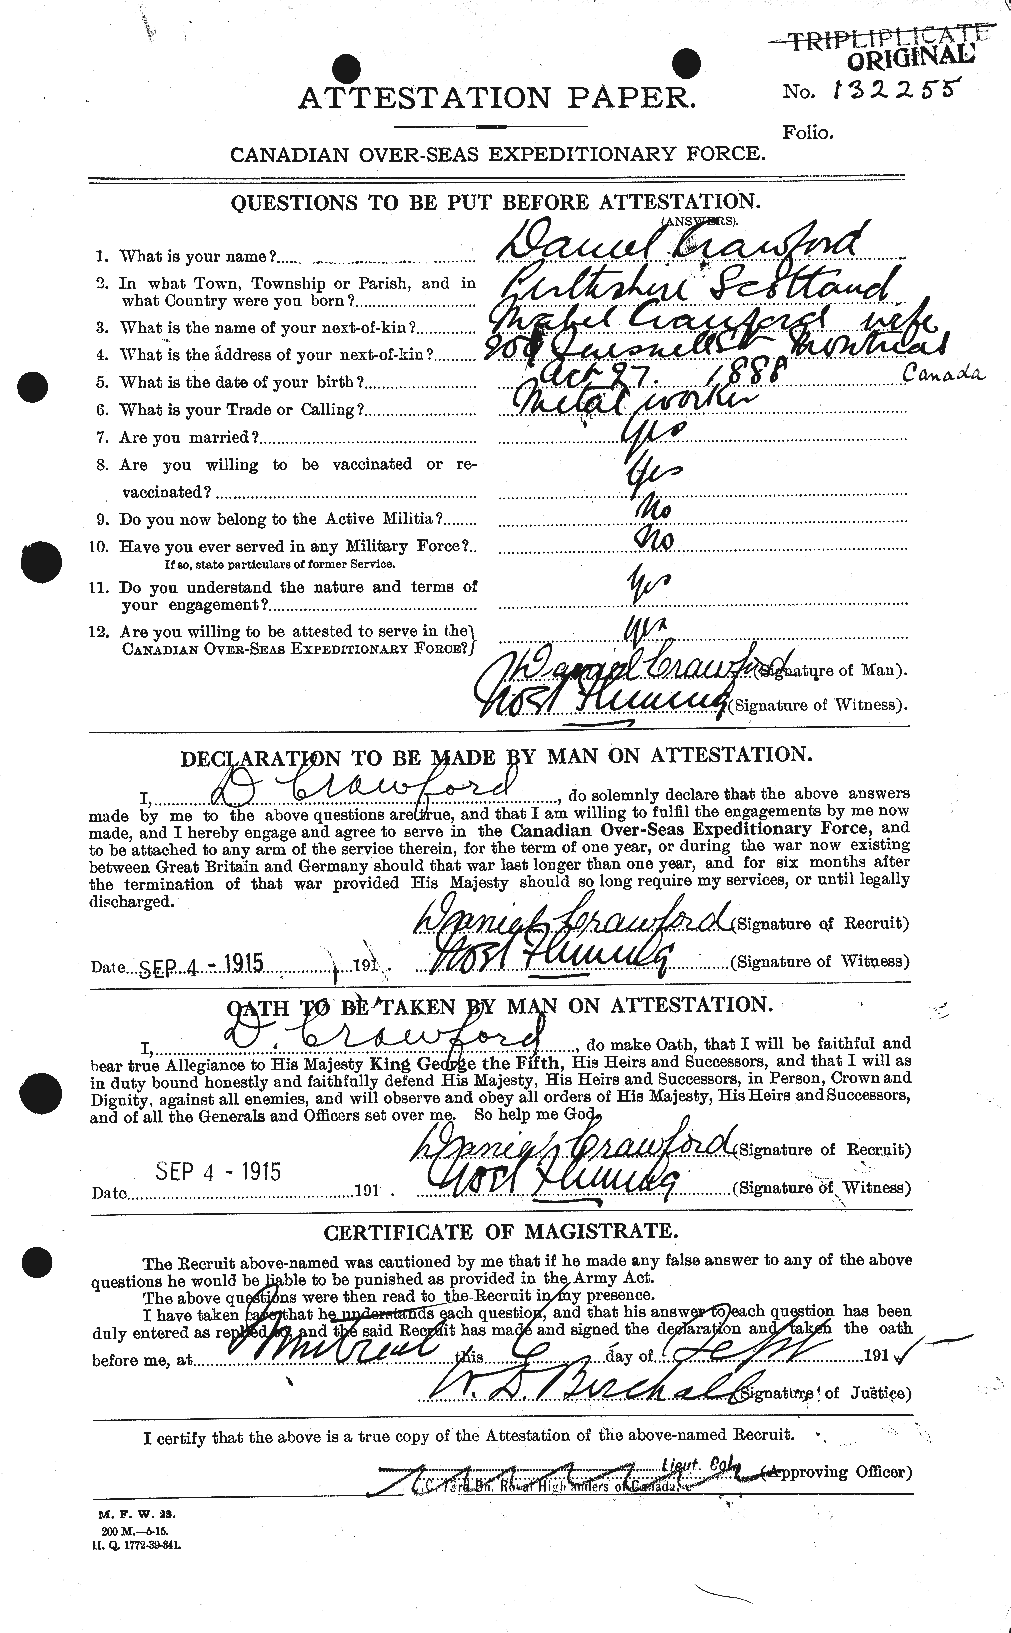 Personnel Records of the First World War - CEF 060823a